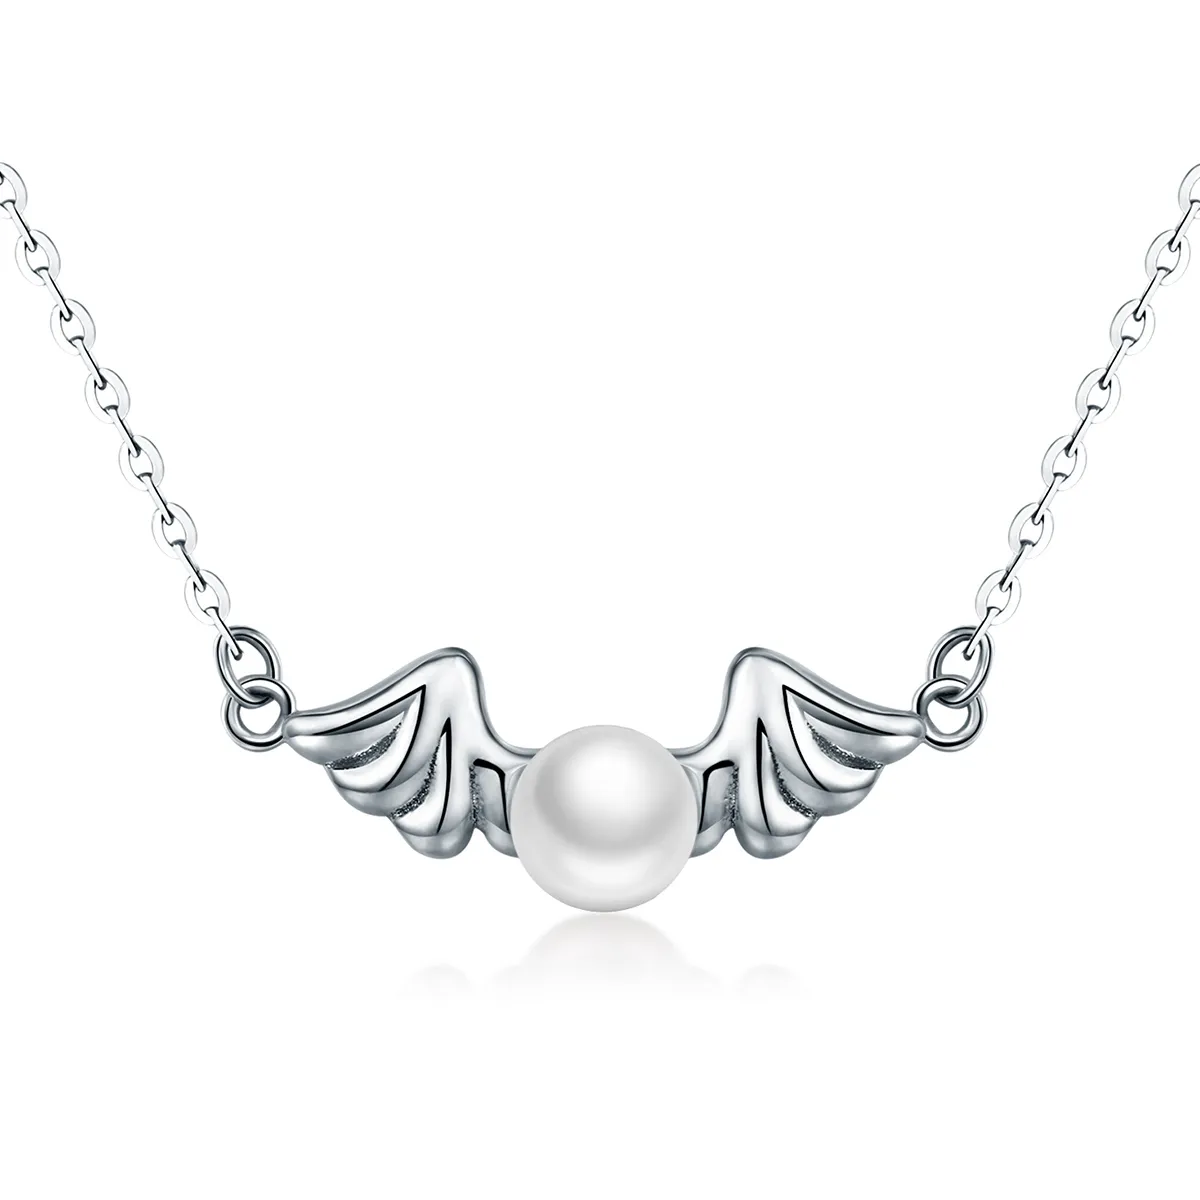 Pandora Style Angel Wings Necklace - VSN021